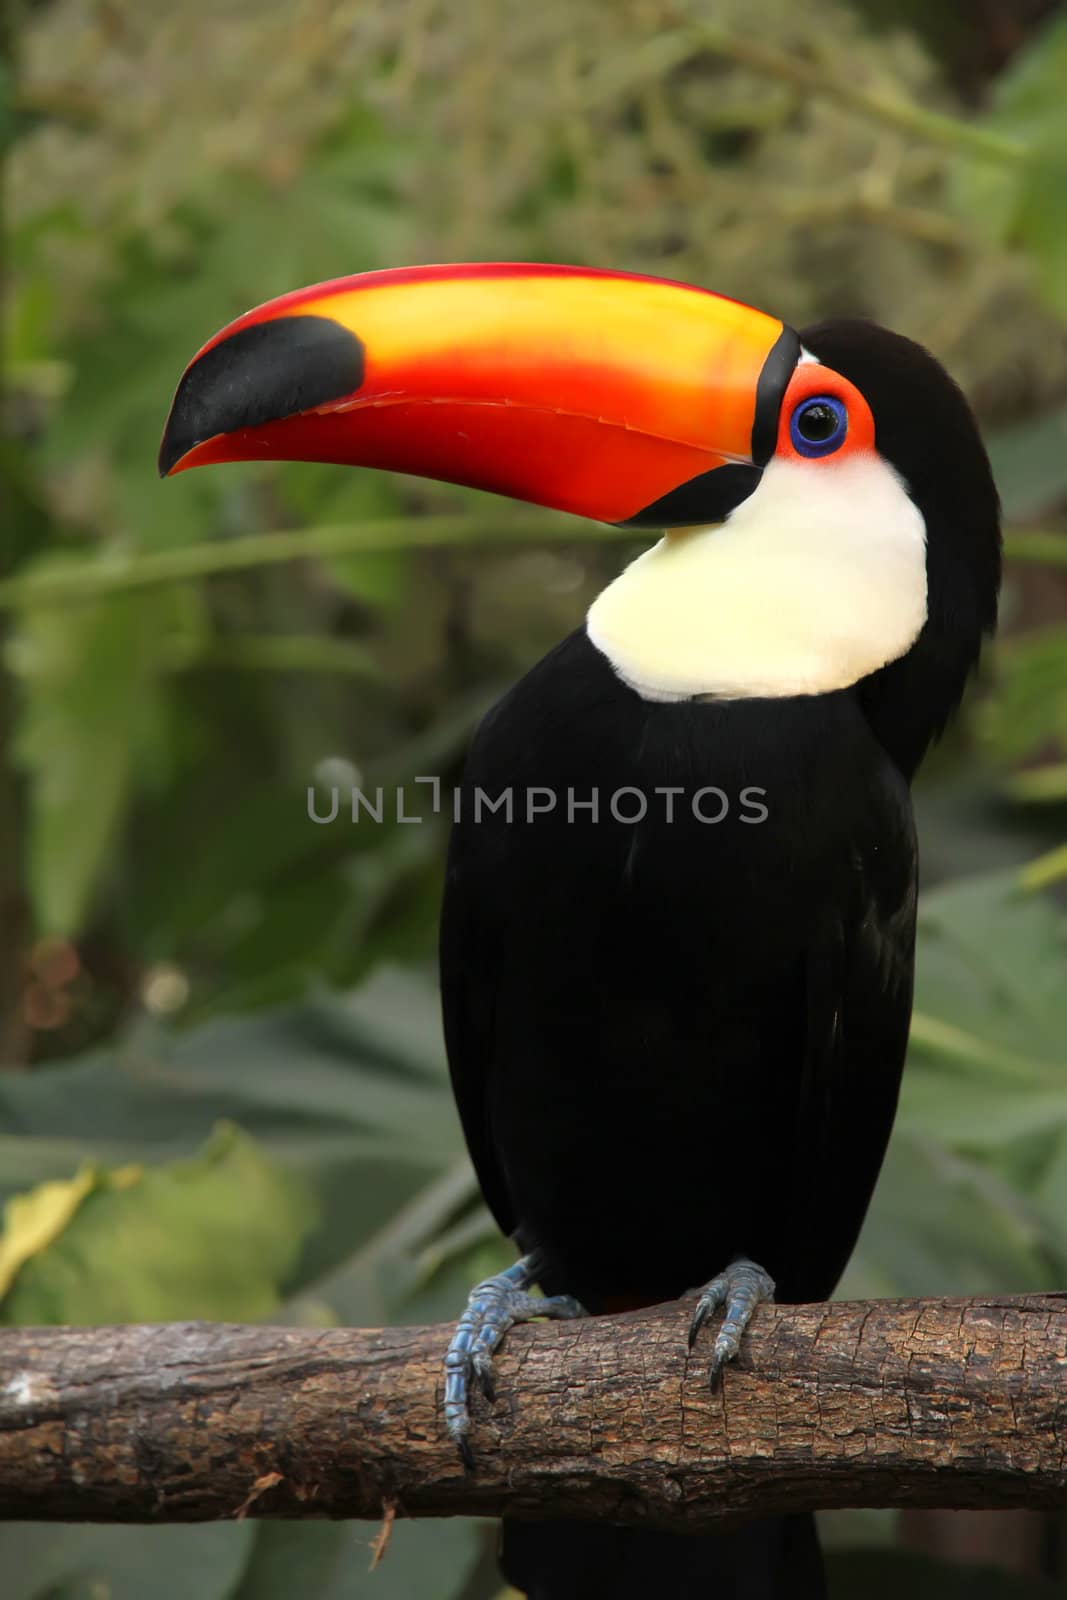 A Tucan sitting on a branch of a tree.